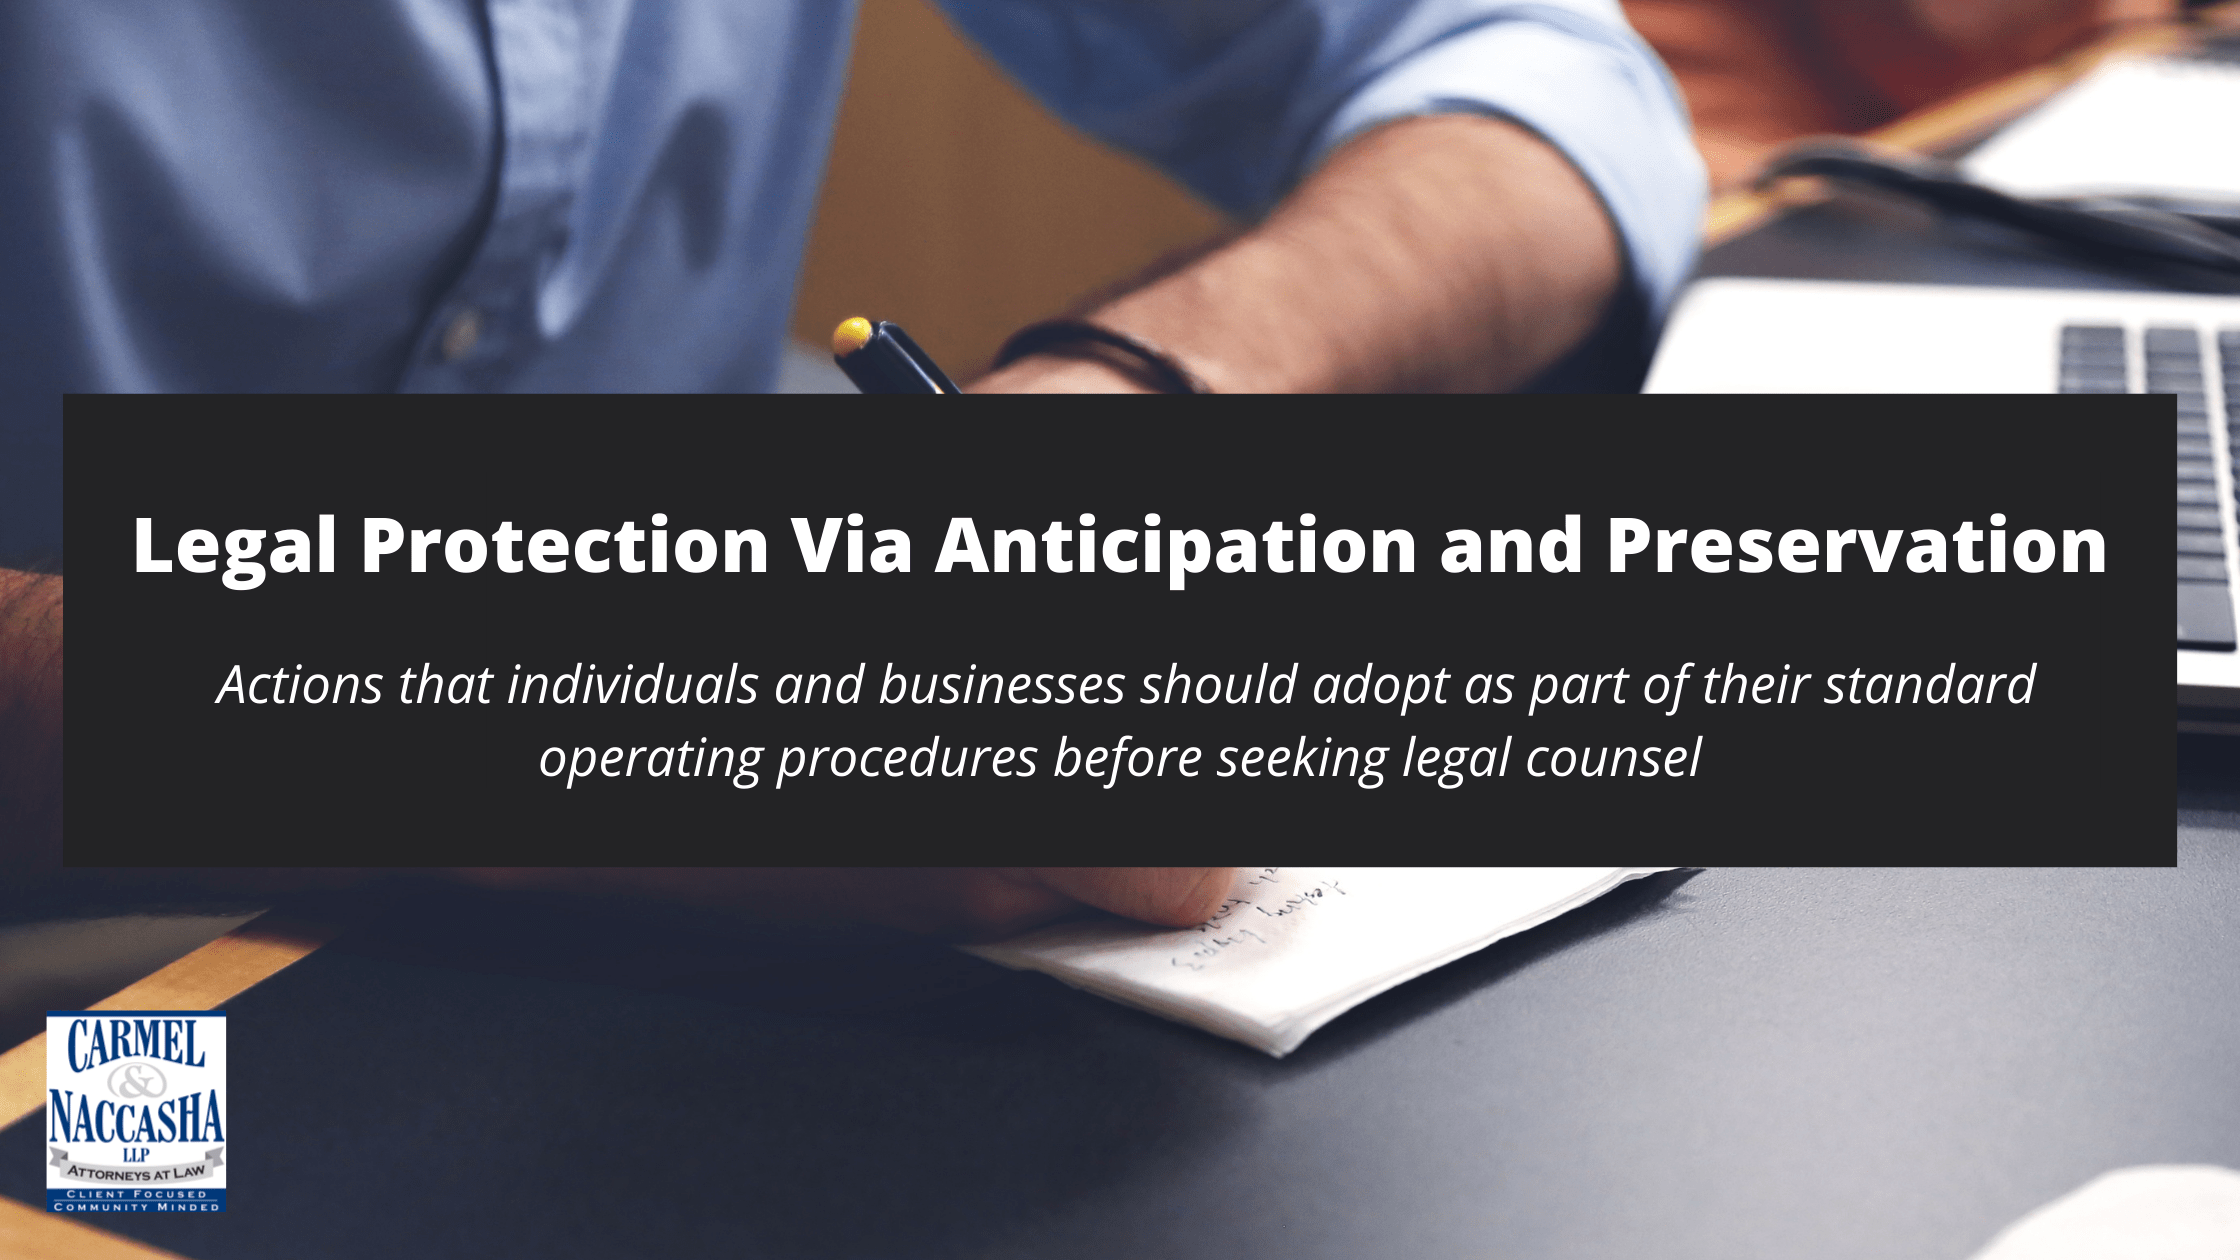 Legal Protection Via Anticipation and Preservation